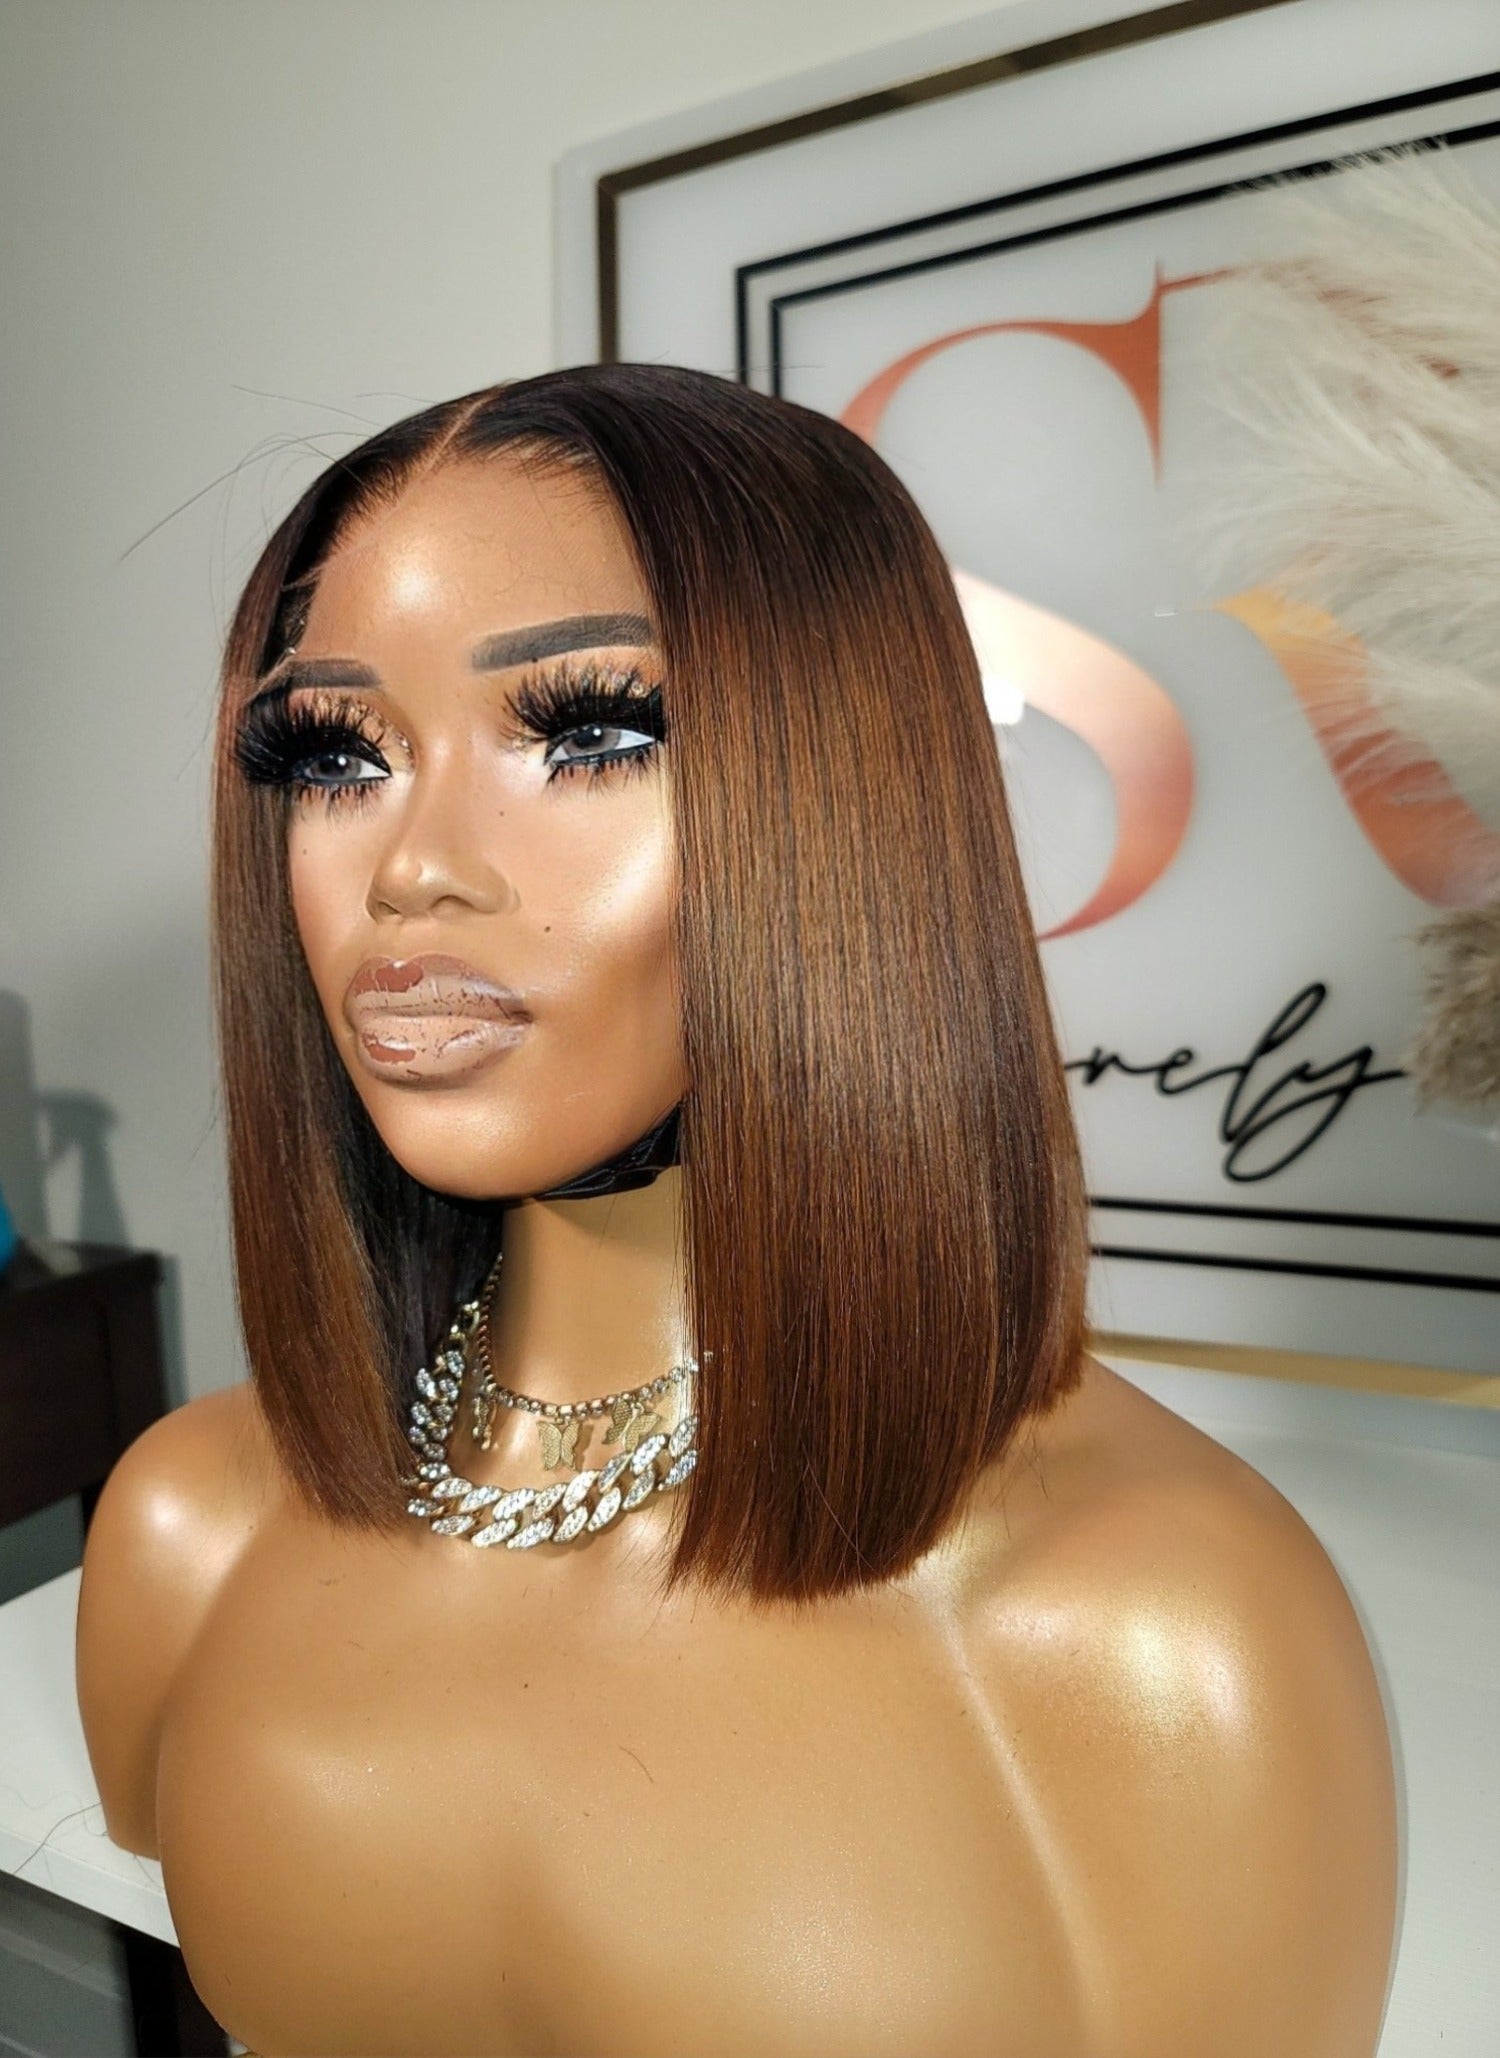 Custom Glueless Wig - Explore our collection of high-quality glueless wigs for a seamless and comfortable hair experience. Ready-to-wear, custom colored, and styled for effortless beauty. Perfect for busy lifestyles.